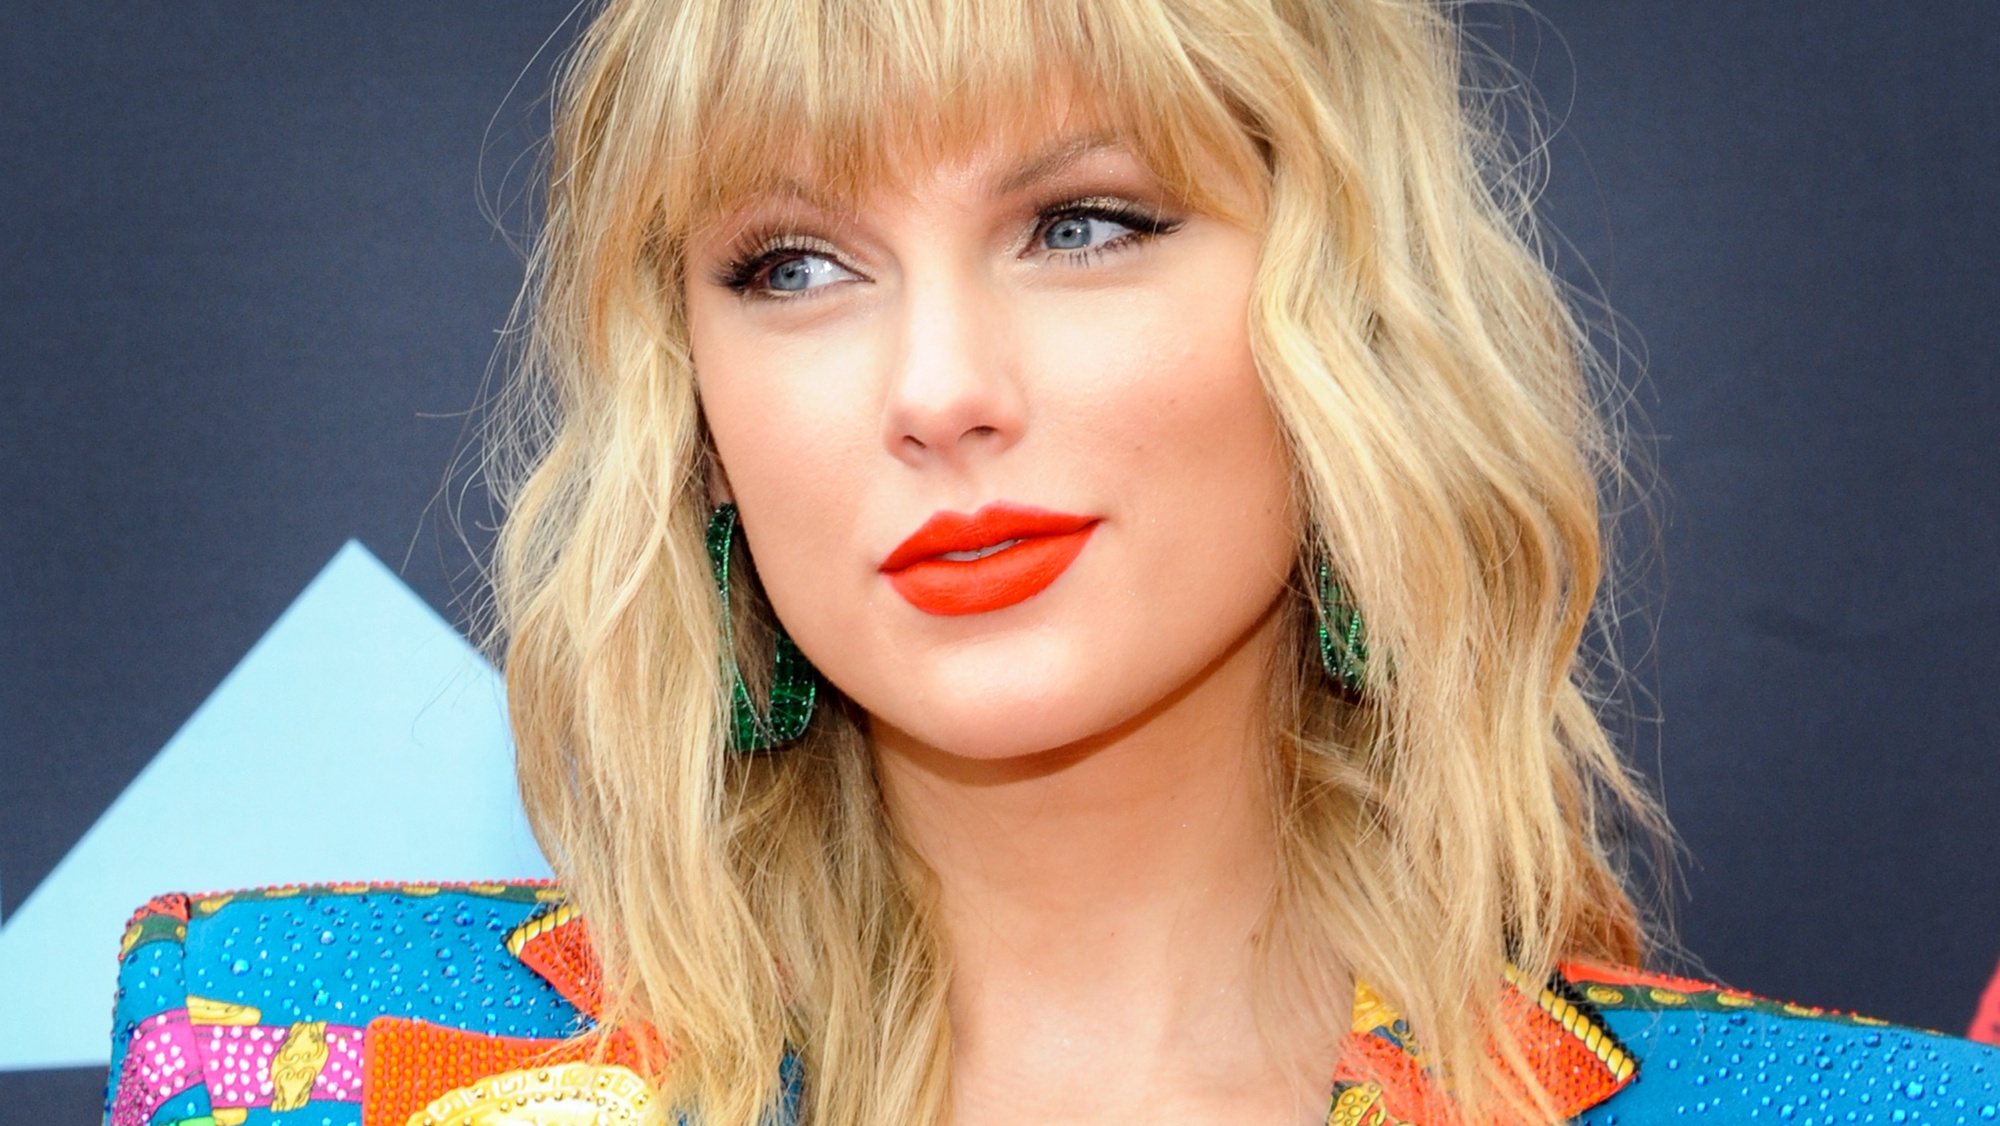 epa08563121 (FILE) - US singer Taylor Swift arrives on the red carpet for the 2019 MTV Video Music Awards in Newark, New Jersey, USA, 26 August 2019 (reissued 23 July 2020). Taylor Swift on 23 July 2020 announced a surprise release of her eighth studio album Folklore.  EPA/DJ JOHNSON *** Local Caption *** 55419736